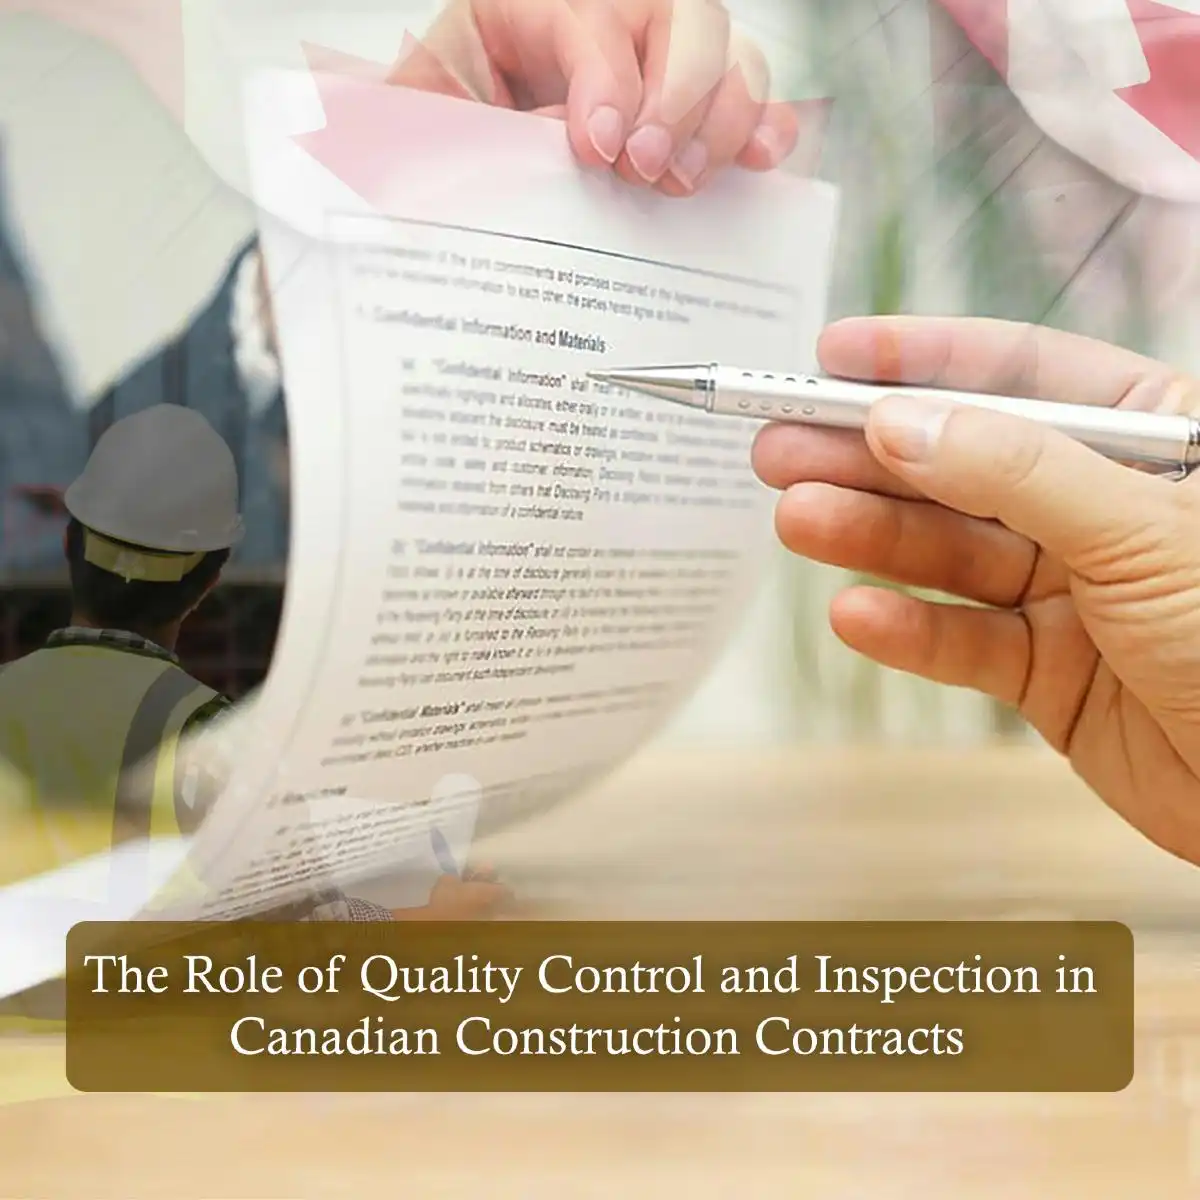 The Role of Quality Control and Inspection in Canadian Construction Contracts